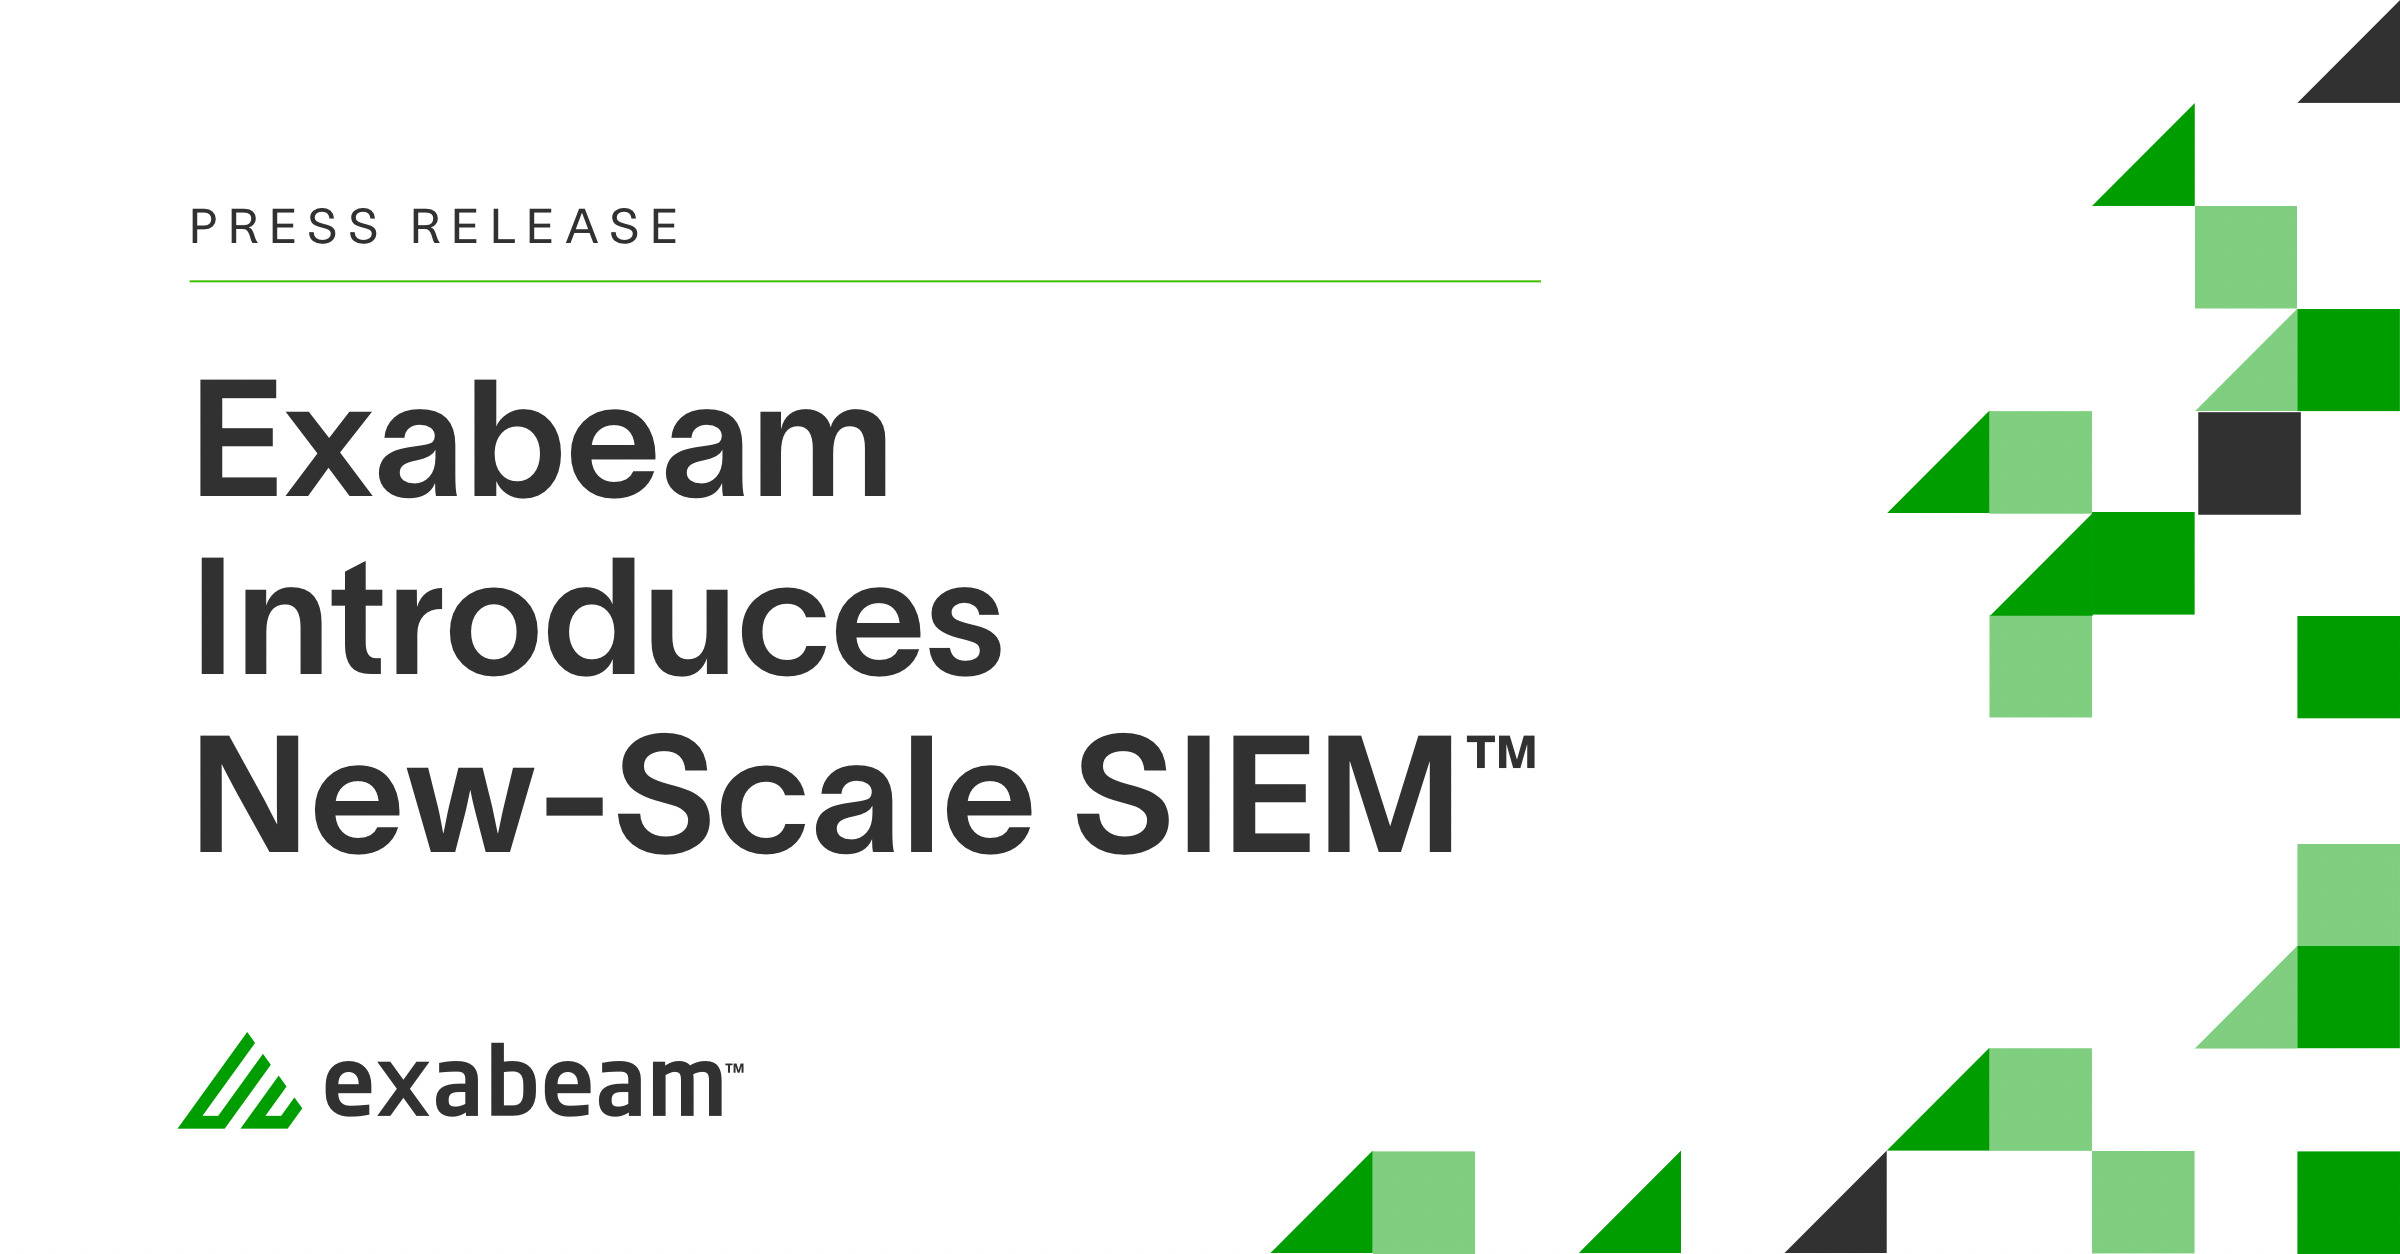 Exabeam Introduces New-Scale SIEM™